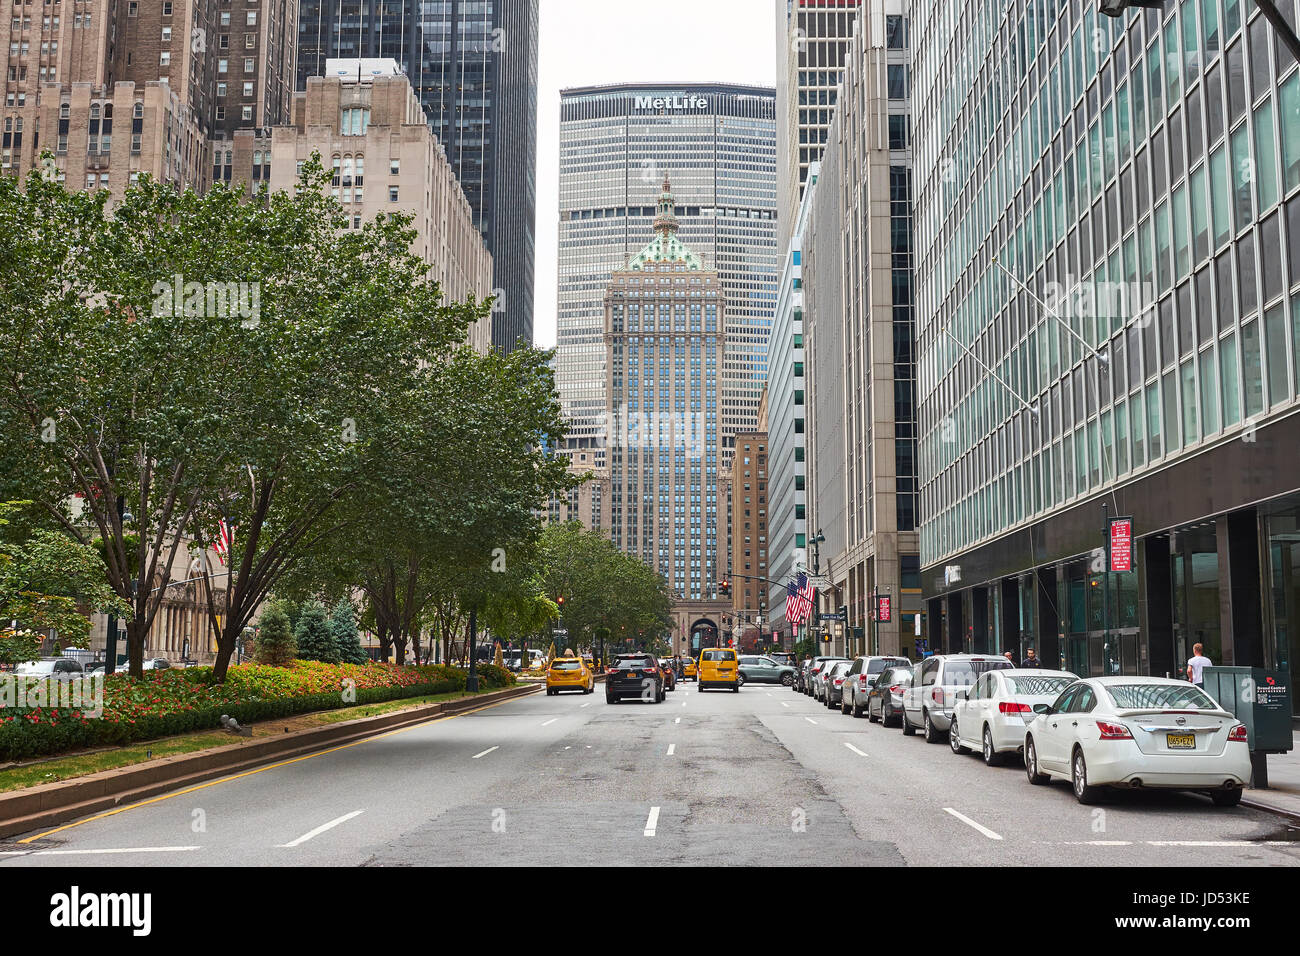 NEW YORK CITY - SEPTEMBER 24, 2016: Looking down Park Avenue towards the Metlife building and the Helmsley building Stock Photo